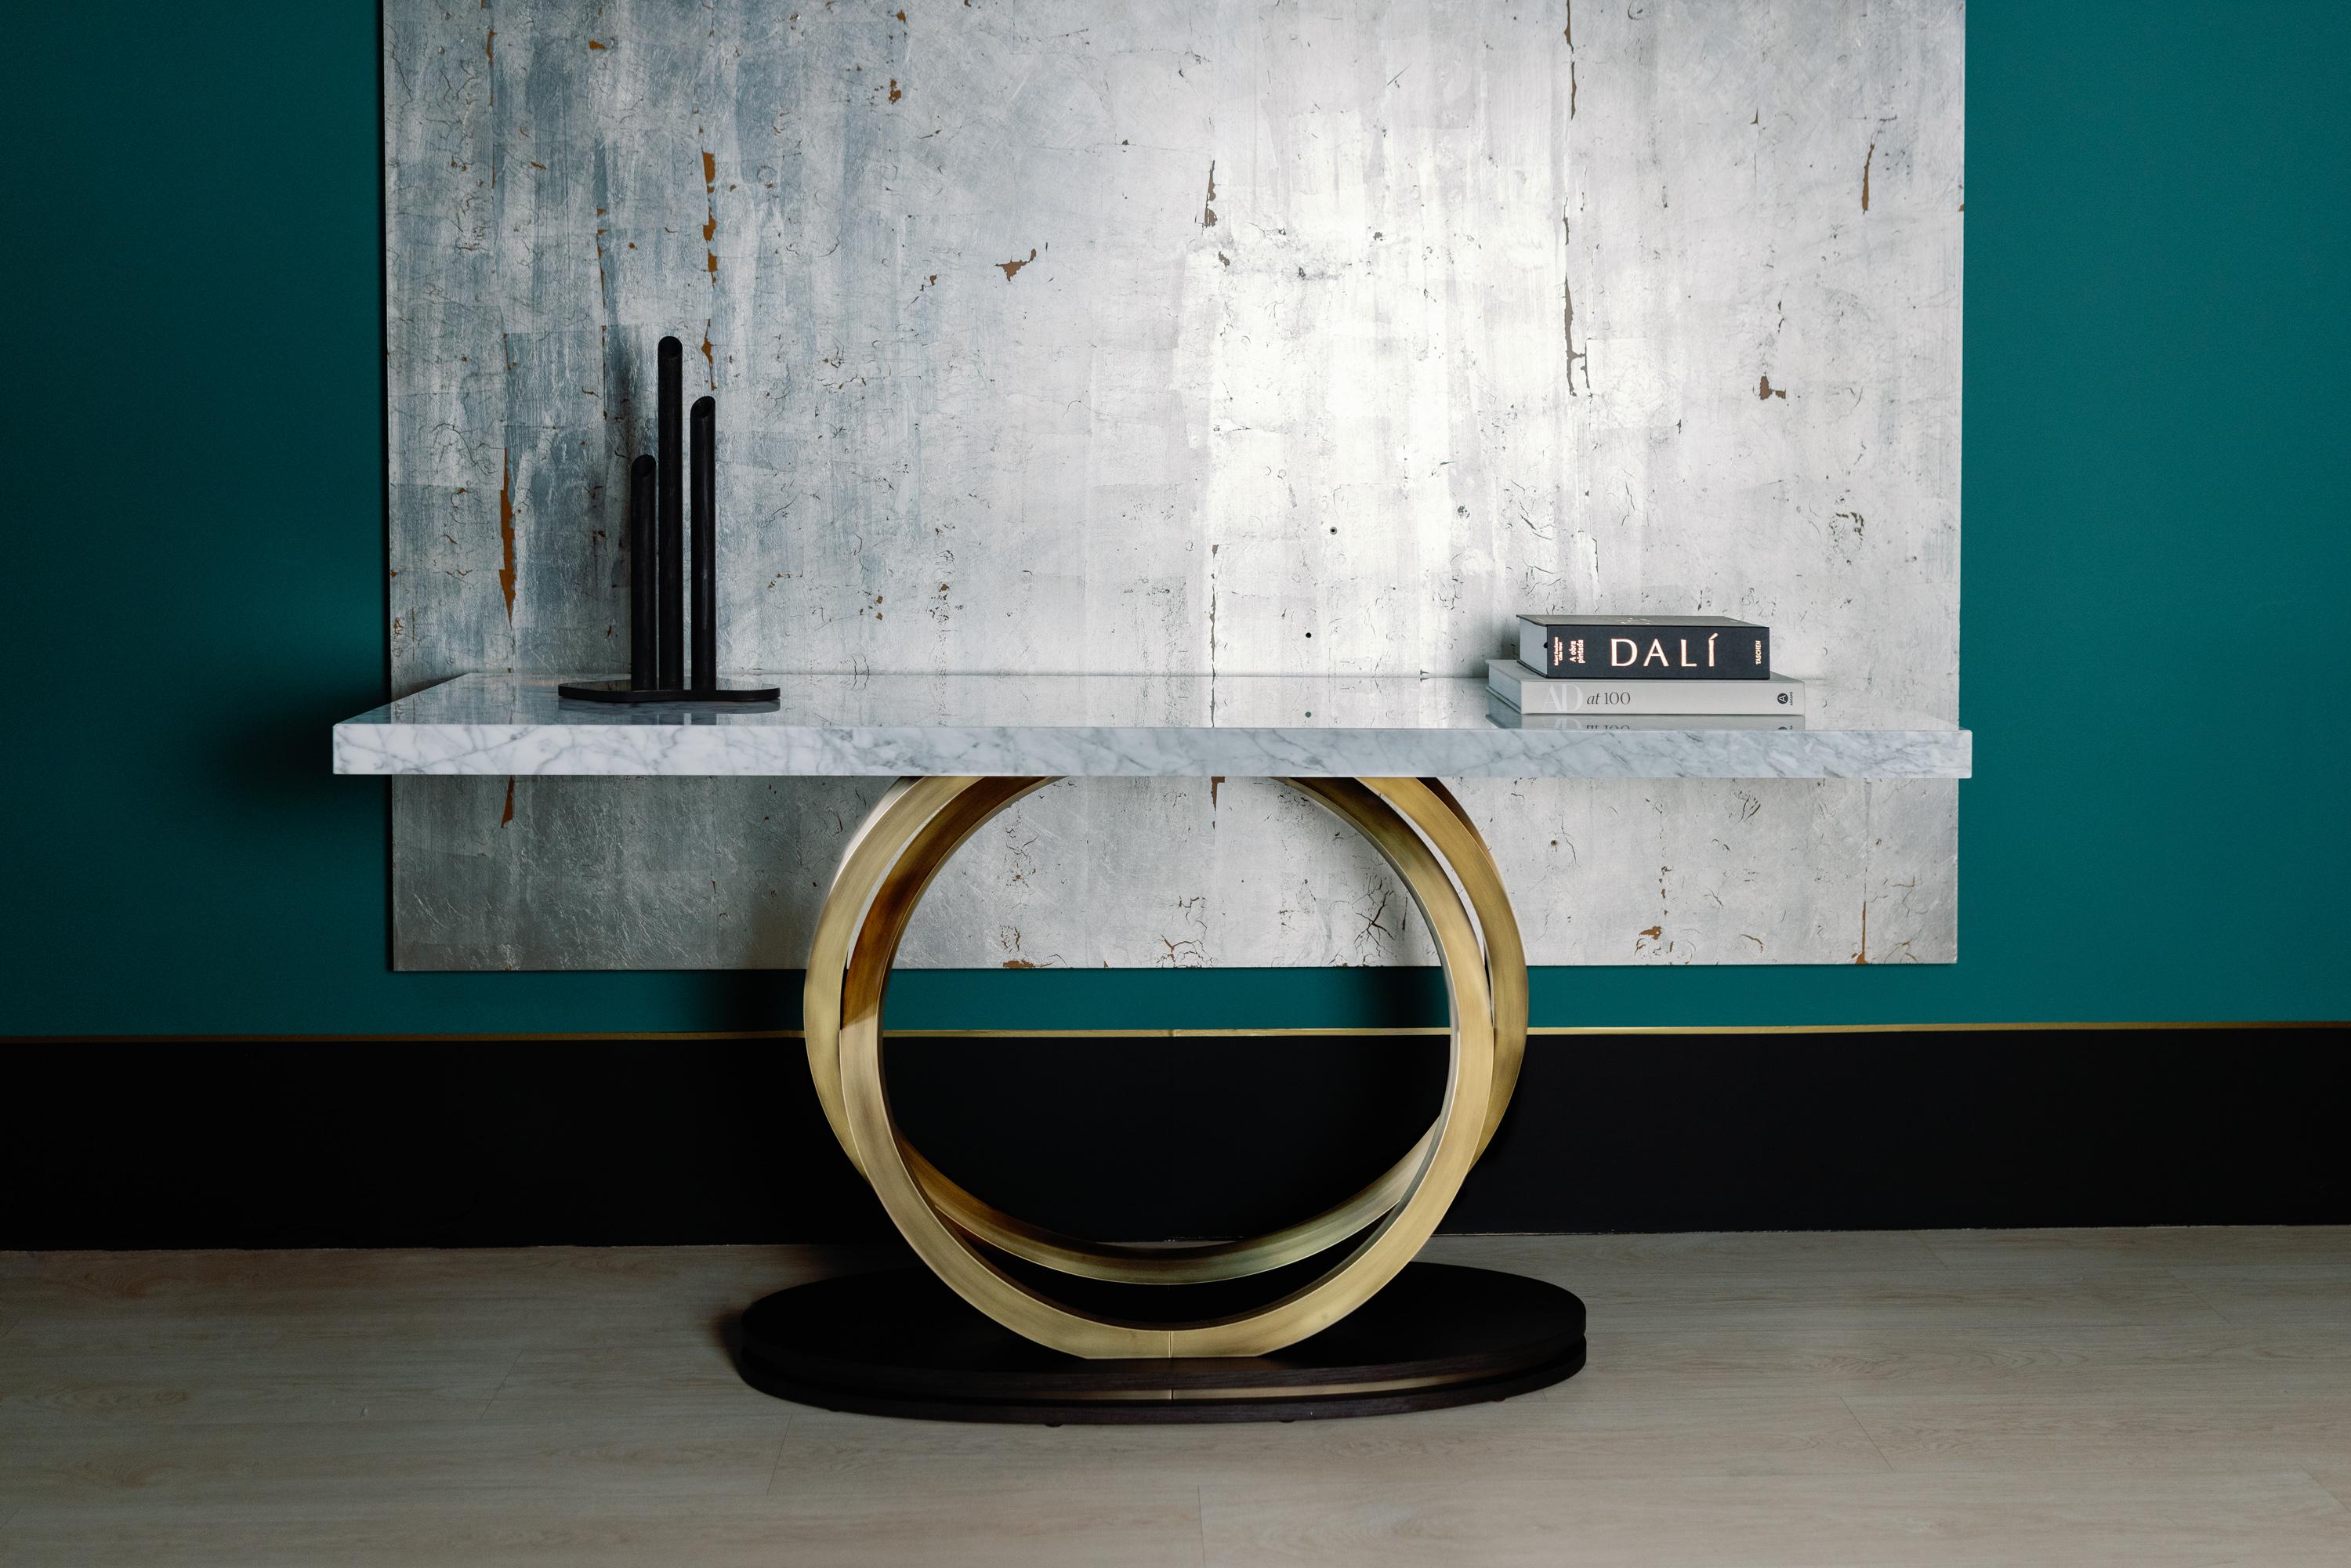 Modern Armilar Console Table, Carrara Marble, Handmade Portugal by Greenapple

The Armilar console table has a modern design that pays homage to the Portuguese armillary sphere, an instrument that allowed Portuguese navigators to sail uncharted seas